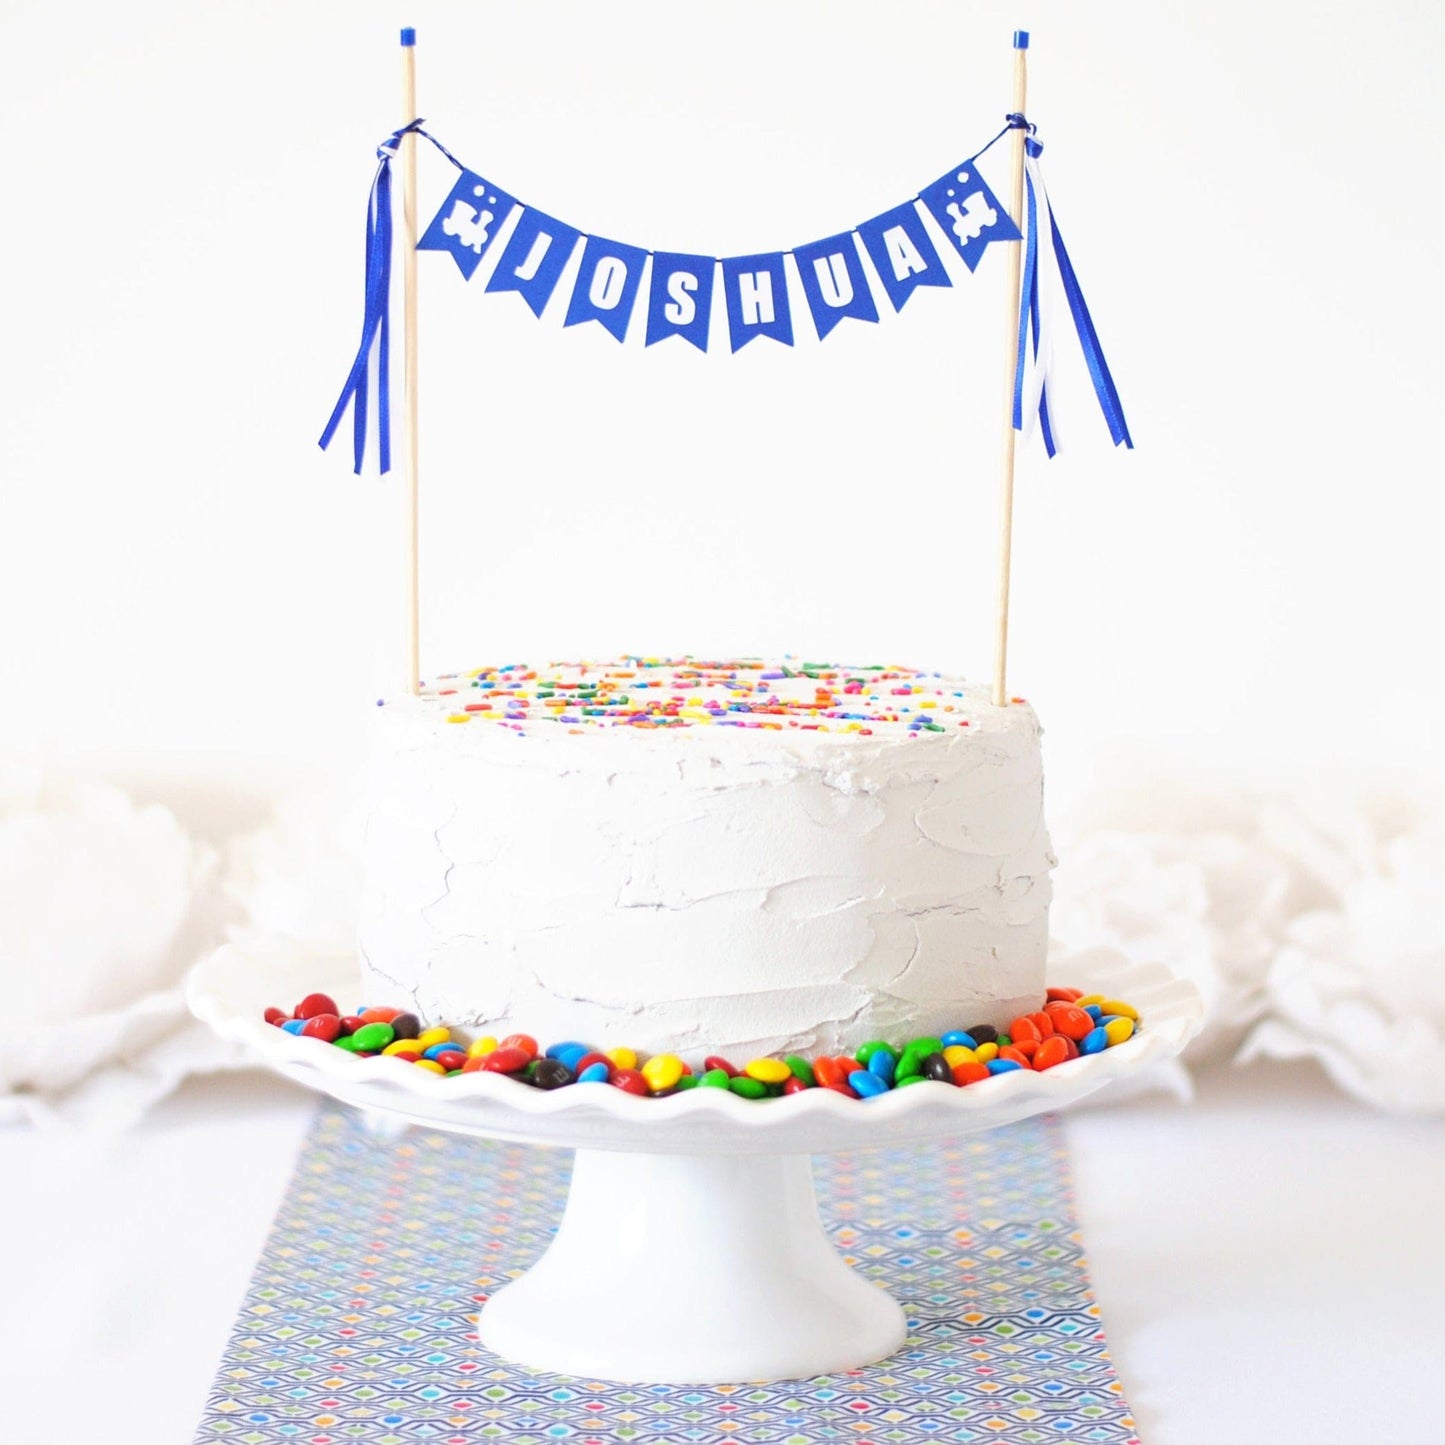 
                  
                    Blue and white personalized train birthday cake topper | personalized cake toppers by Avalon Sunshine
                  
                